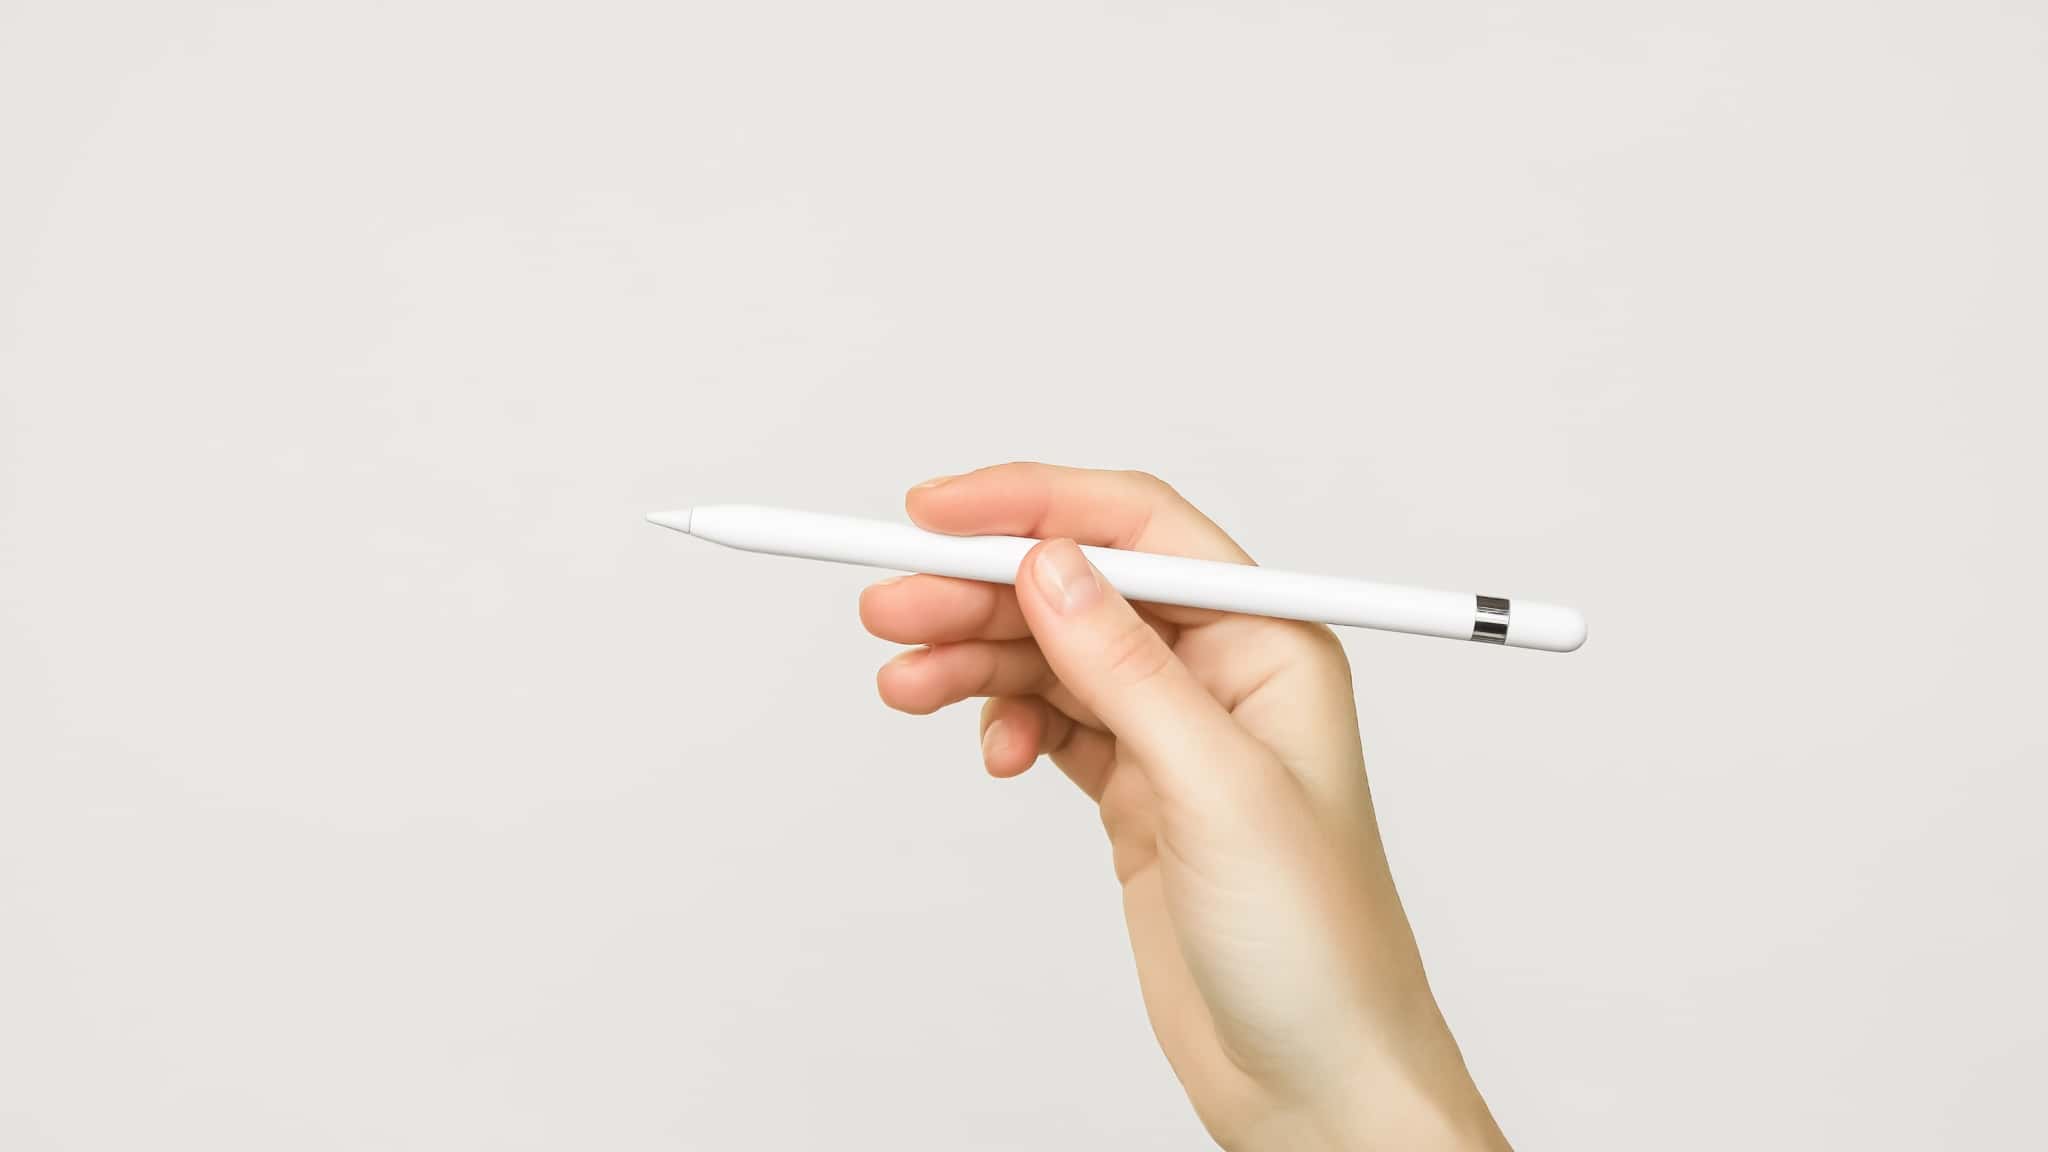 Patent Application Points to Updated Apple Pencil Compatible With iPhone